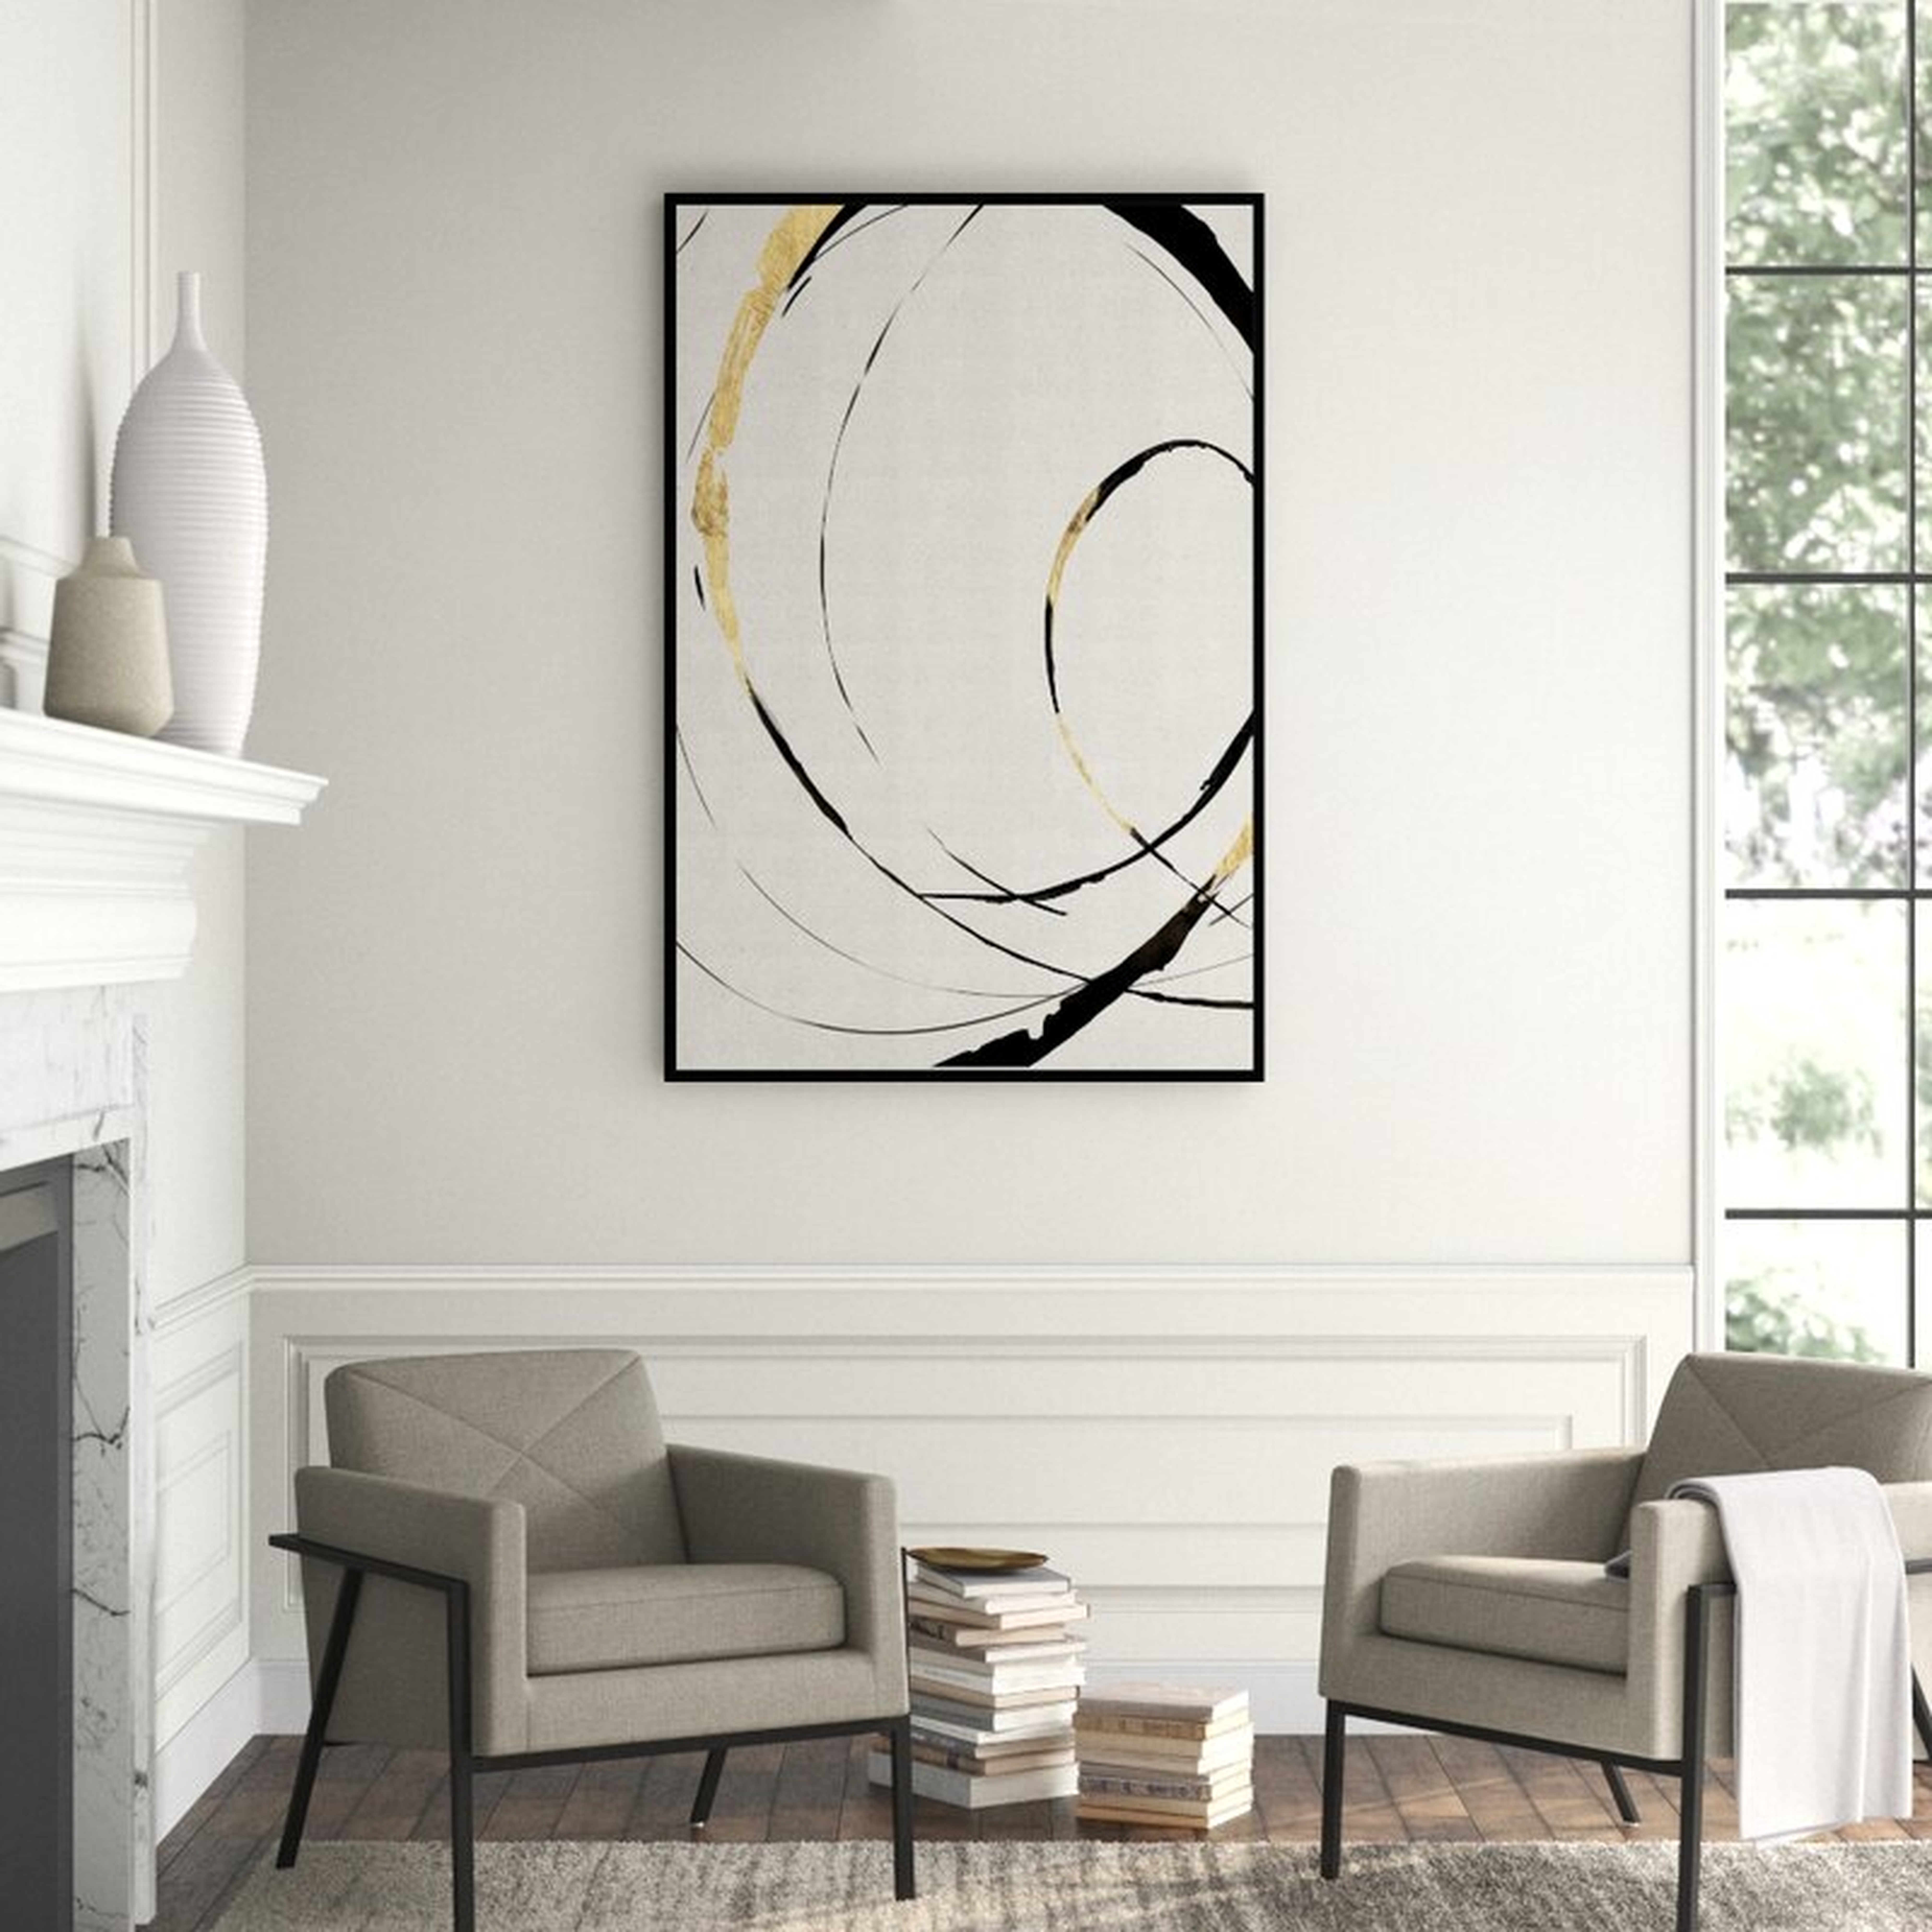 JBass Grand Gallery Collection 'Gold Ribbon III' Framed Graphic Art Print on Canvas - Perigold